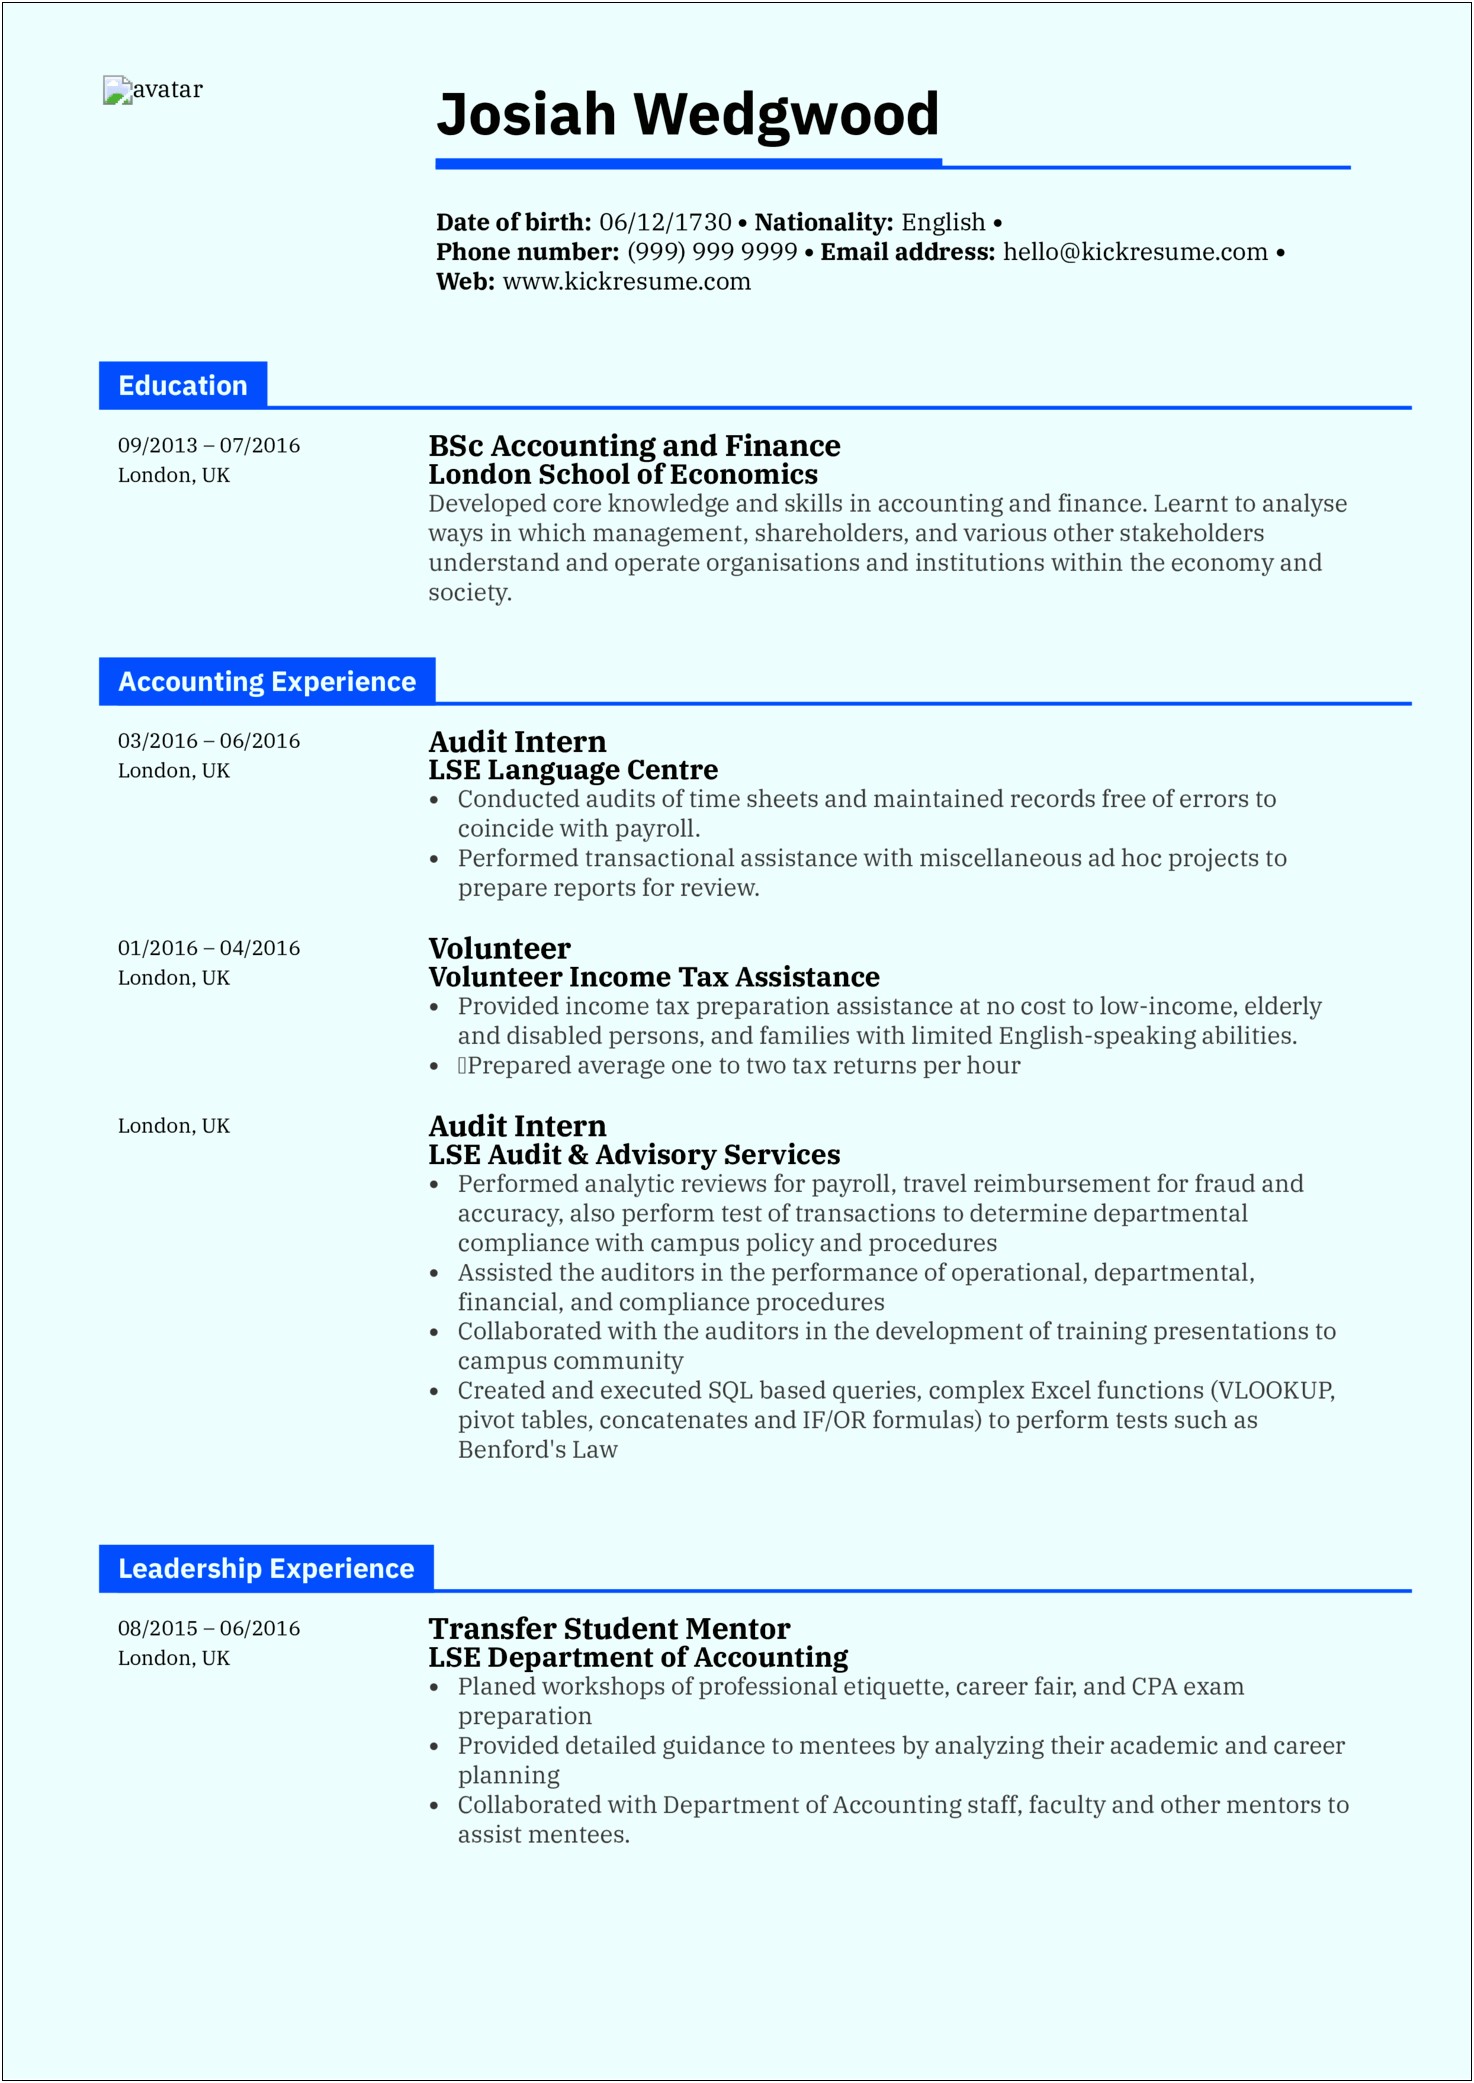 Resume Sample For Fresh Graduate Without Experience Template